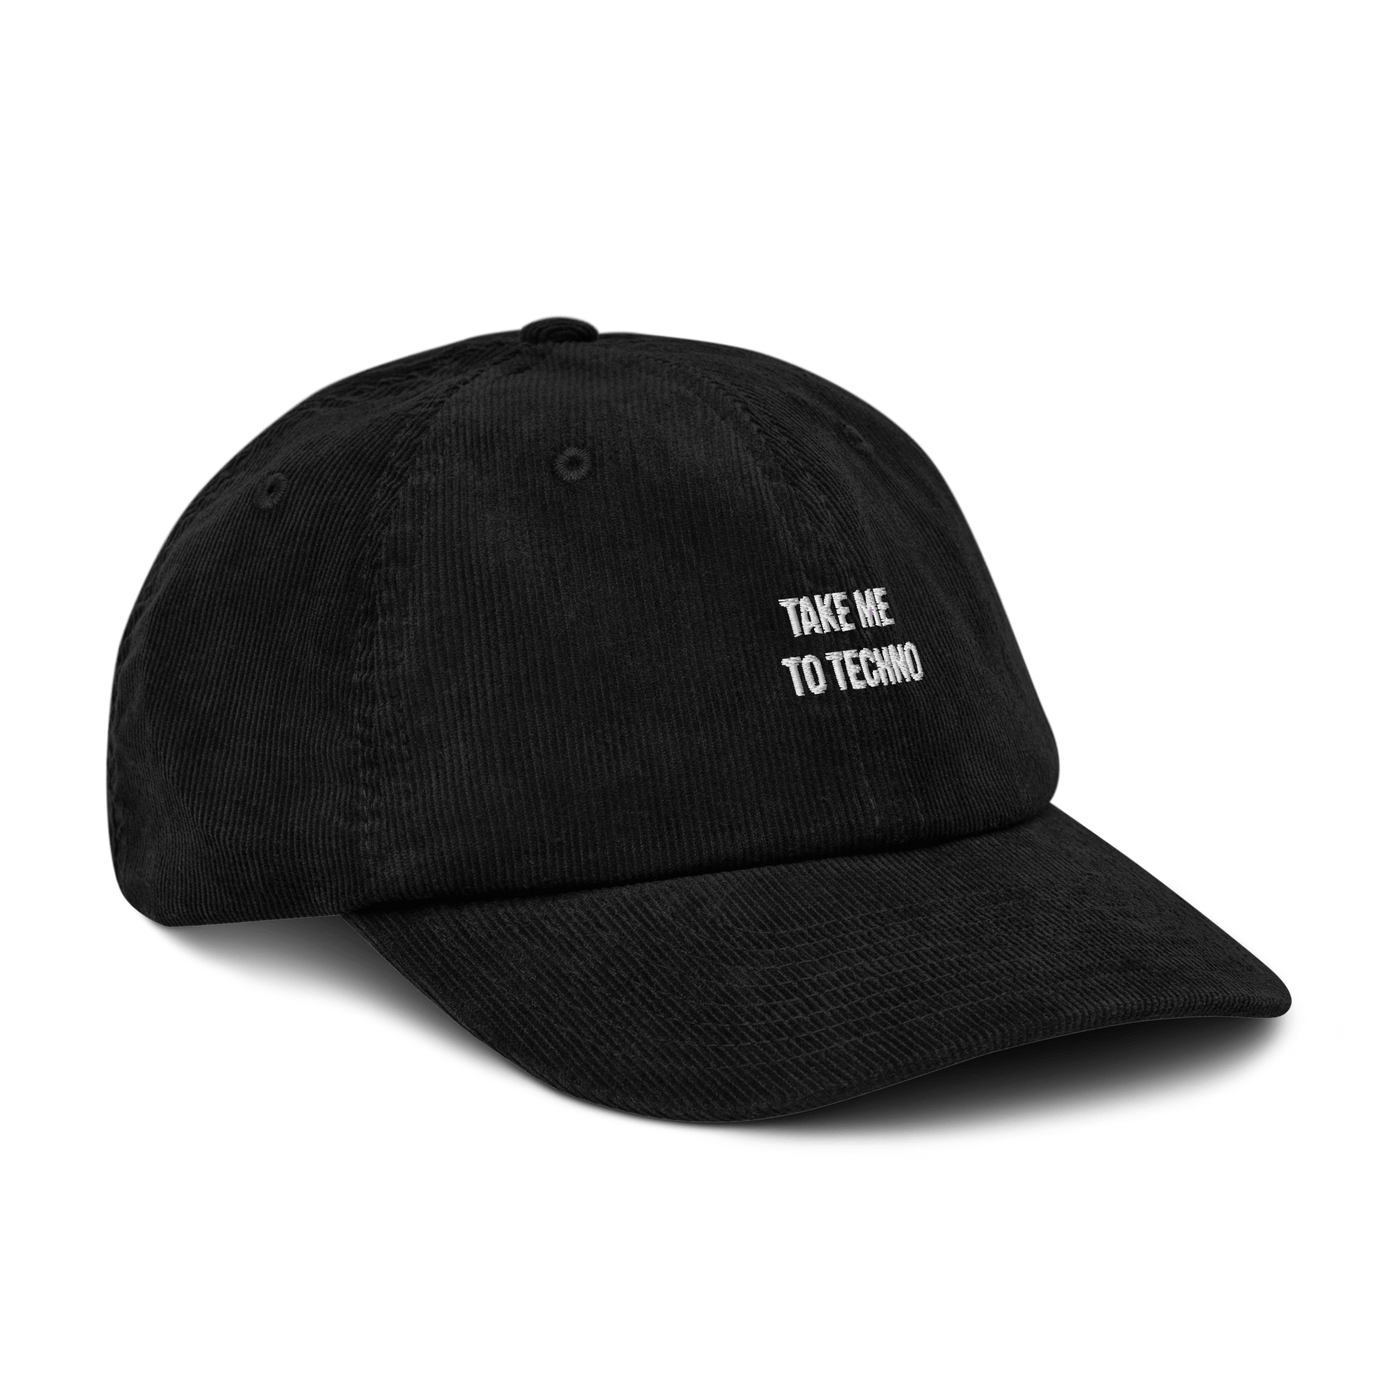 Take me to techno Corduroy hat - Black - - Just Another Cap Store